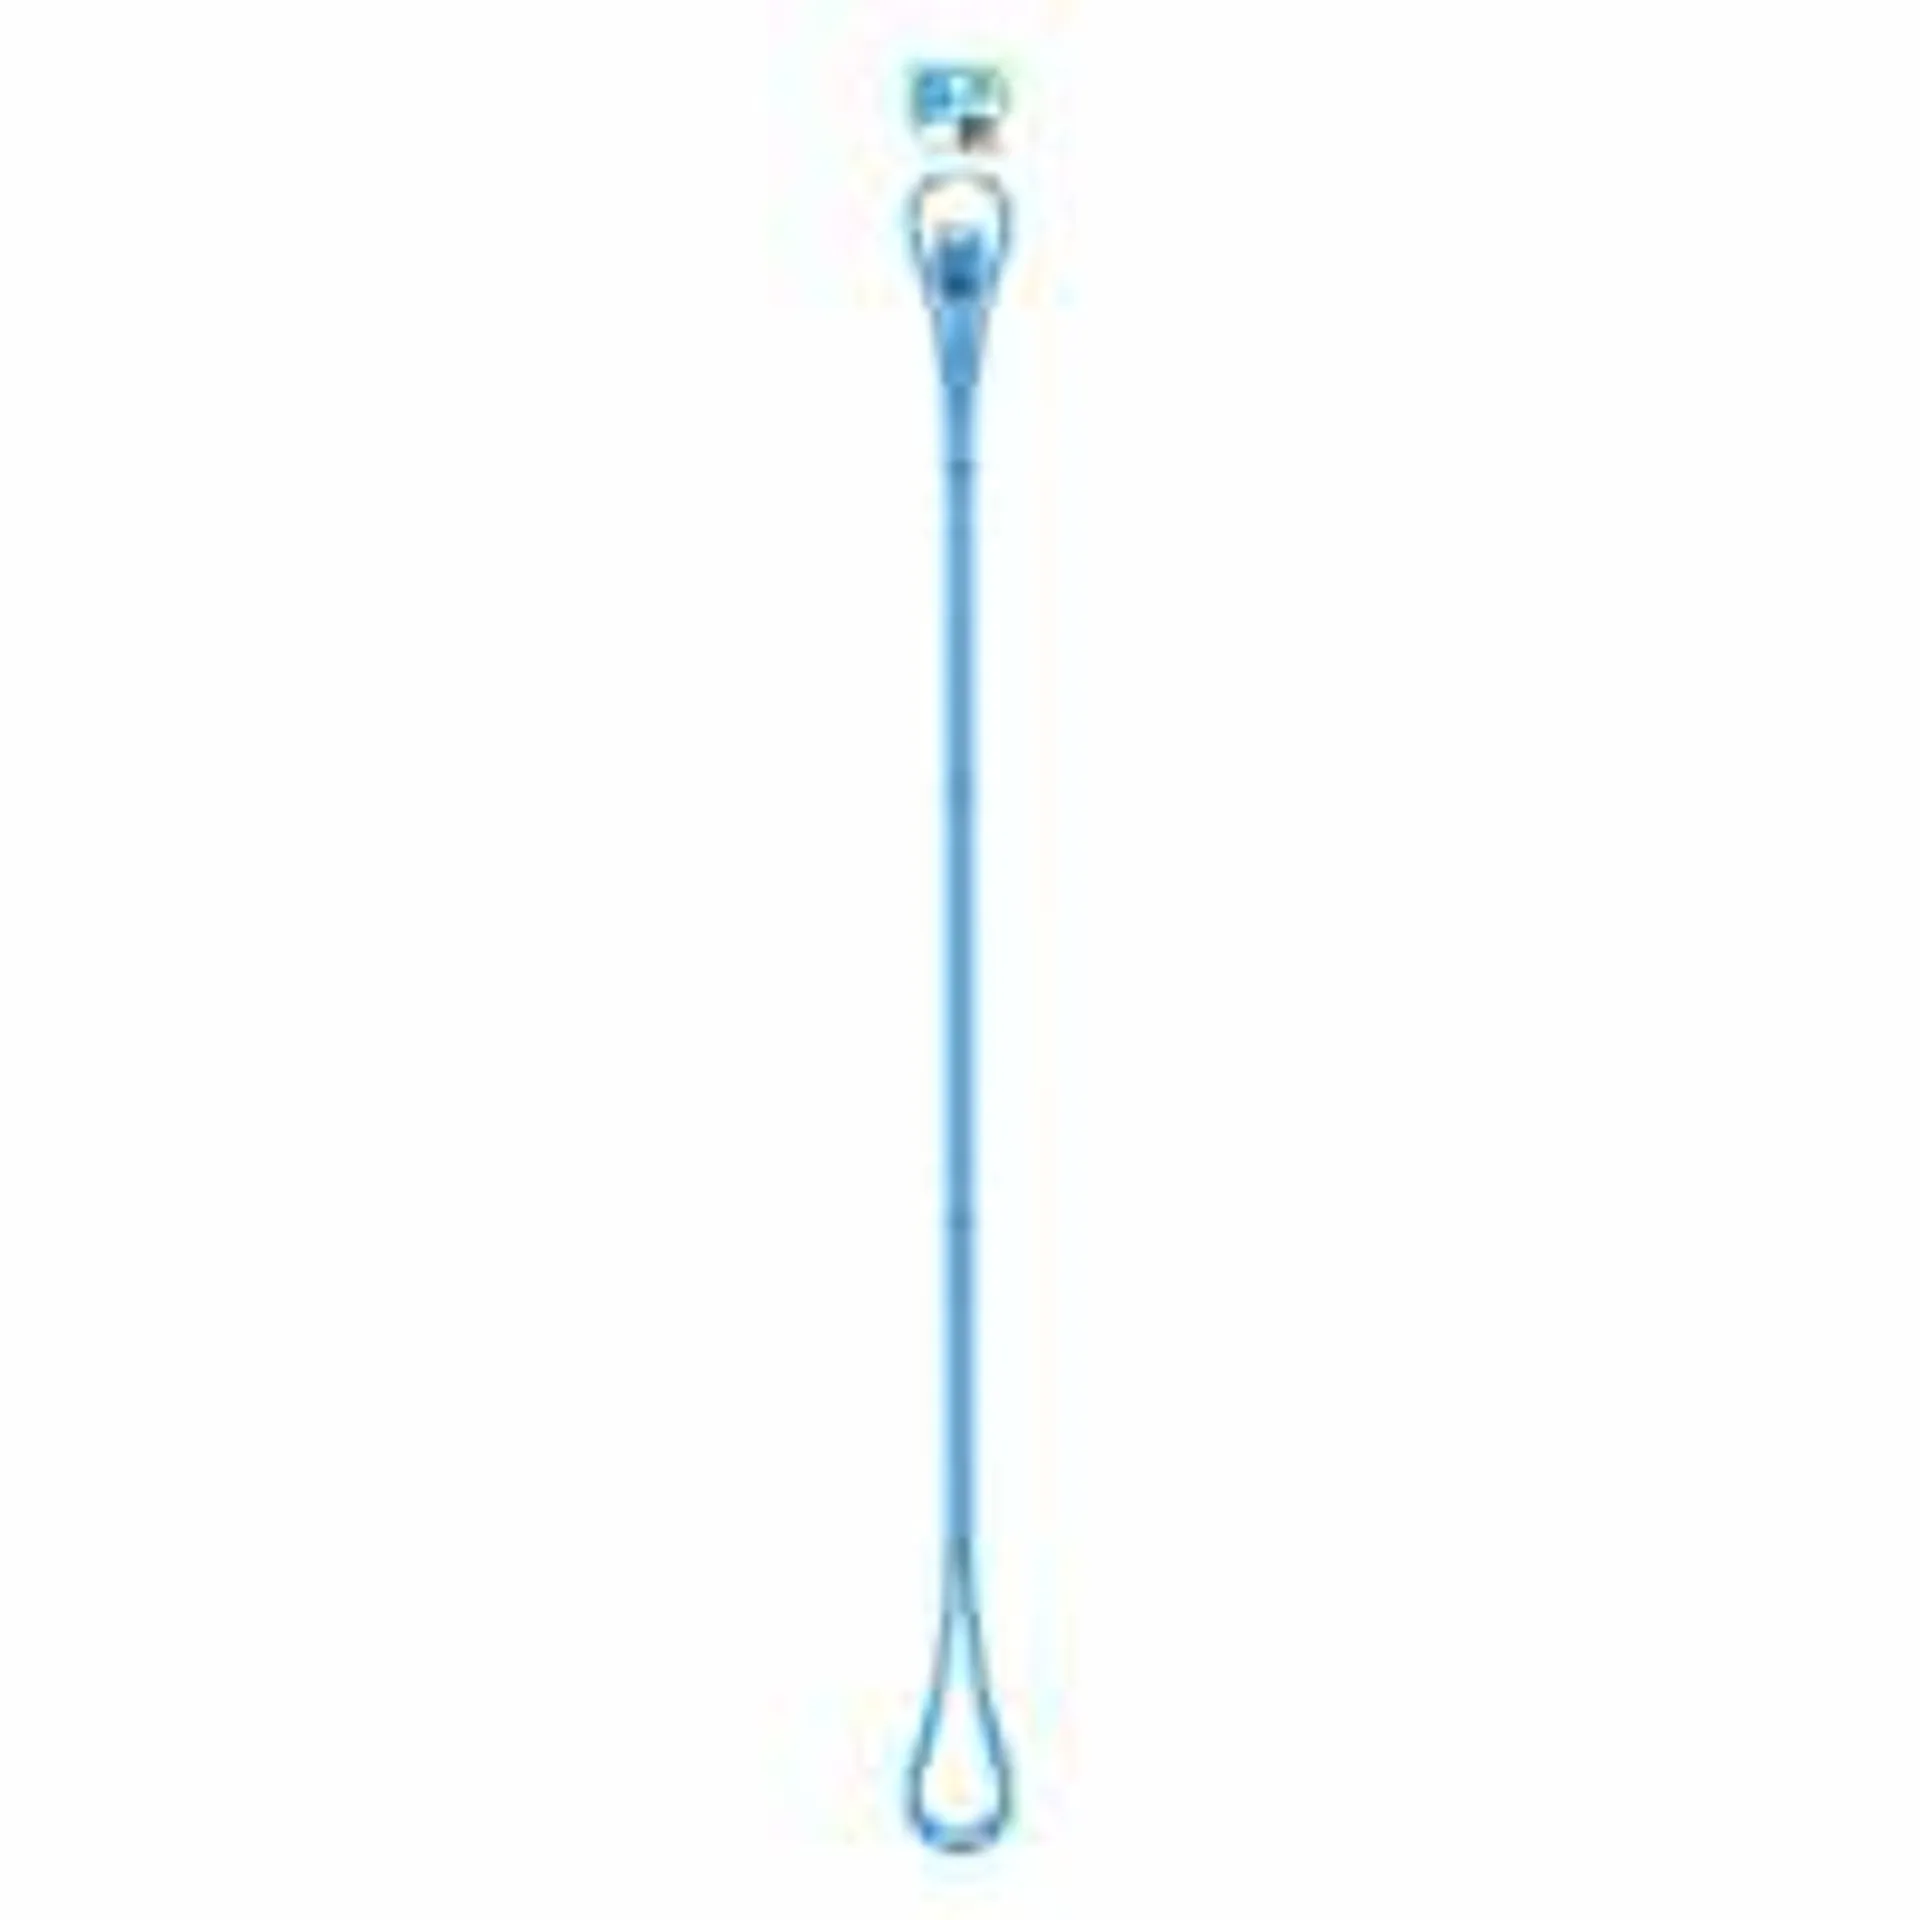 CELLCandy Micro USB Braided Charge and Sync Cable - Light Blue